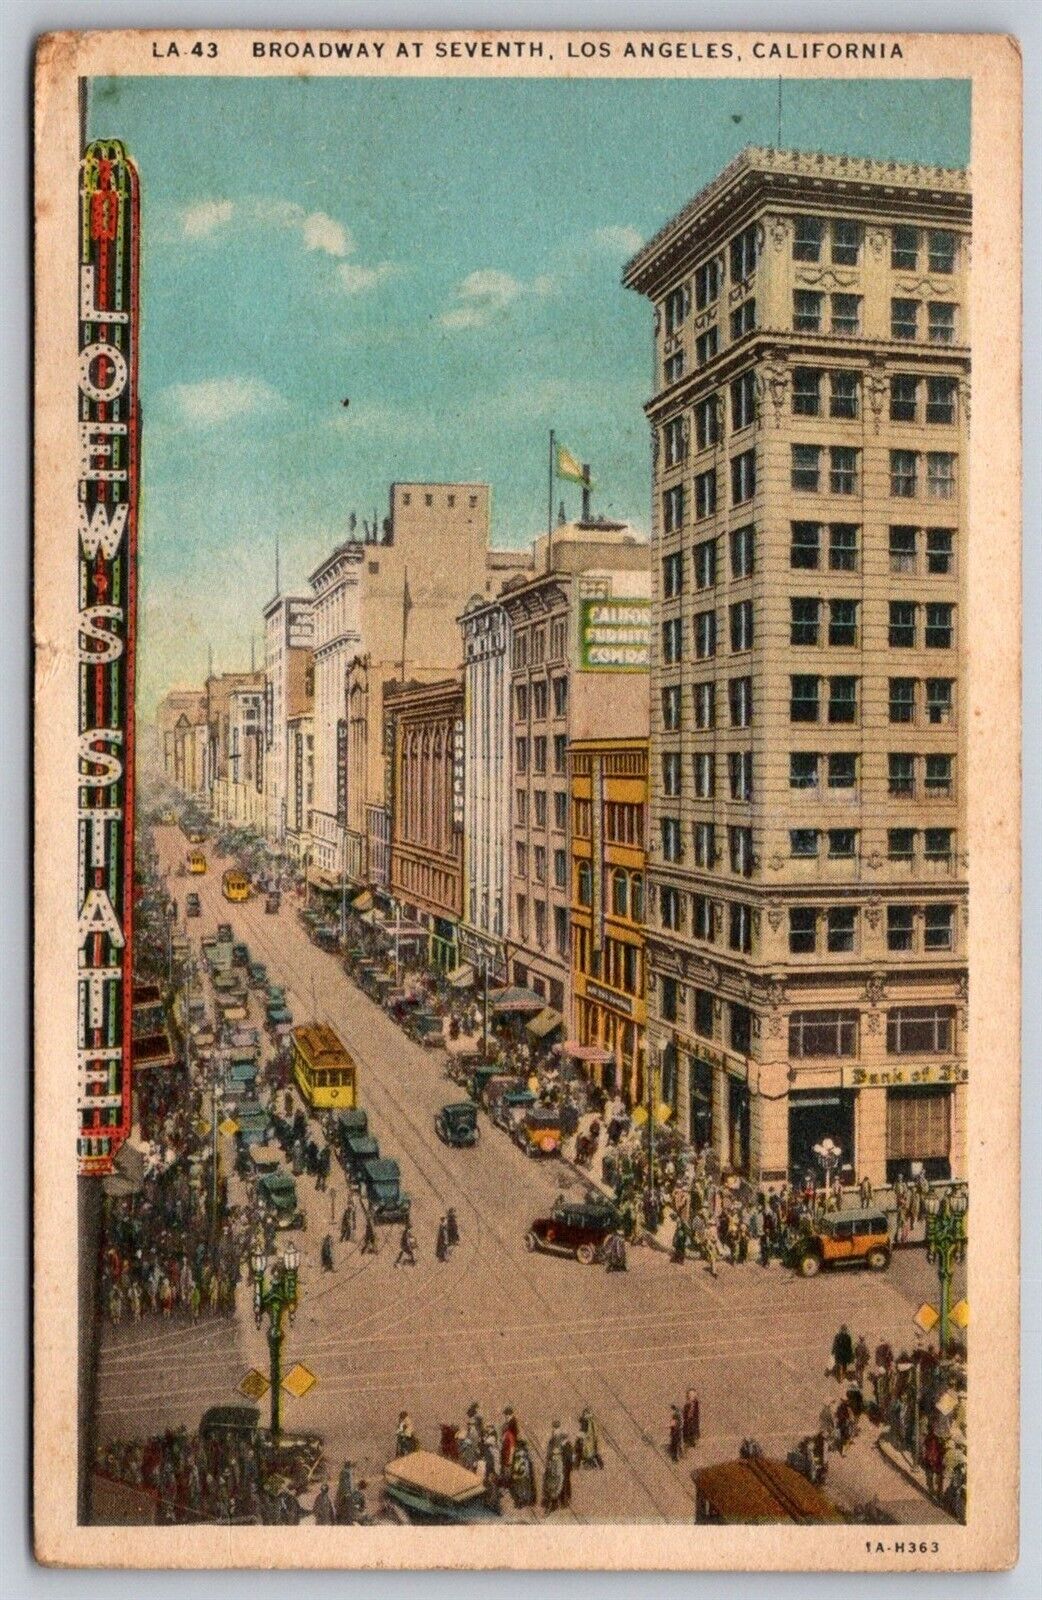 Los Angeles California Postcard Broadway Seventh Loews State Theater Trolley Car